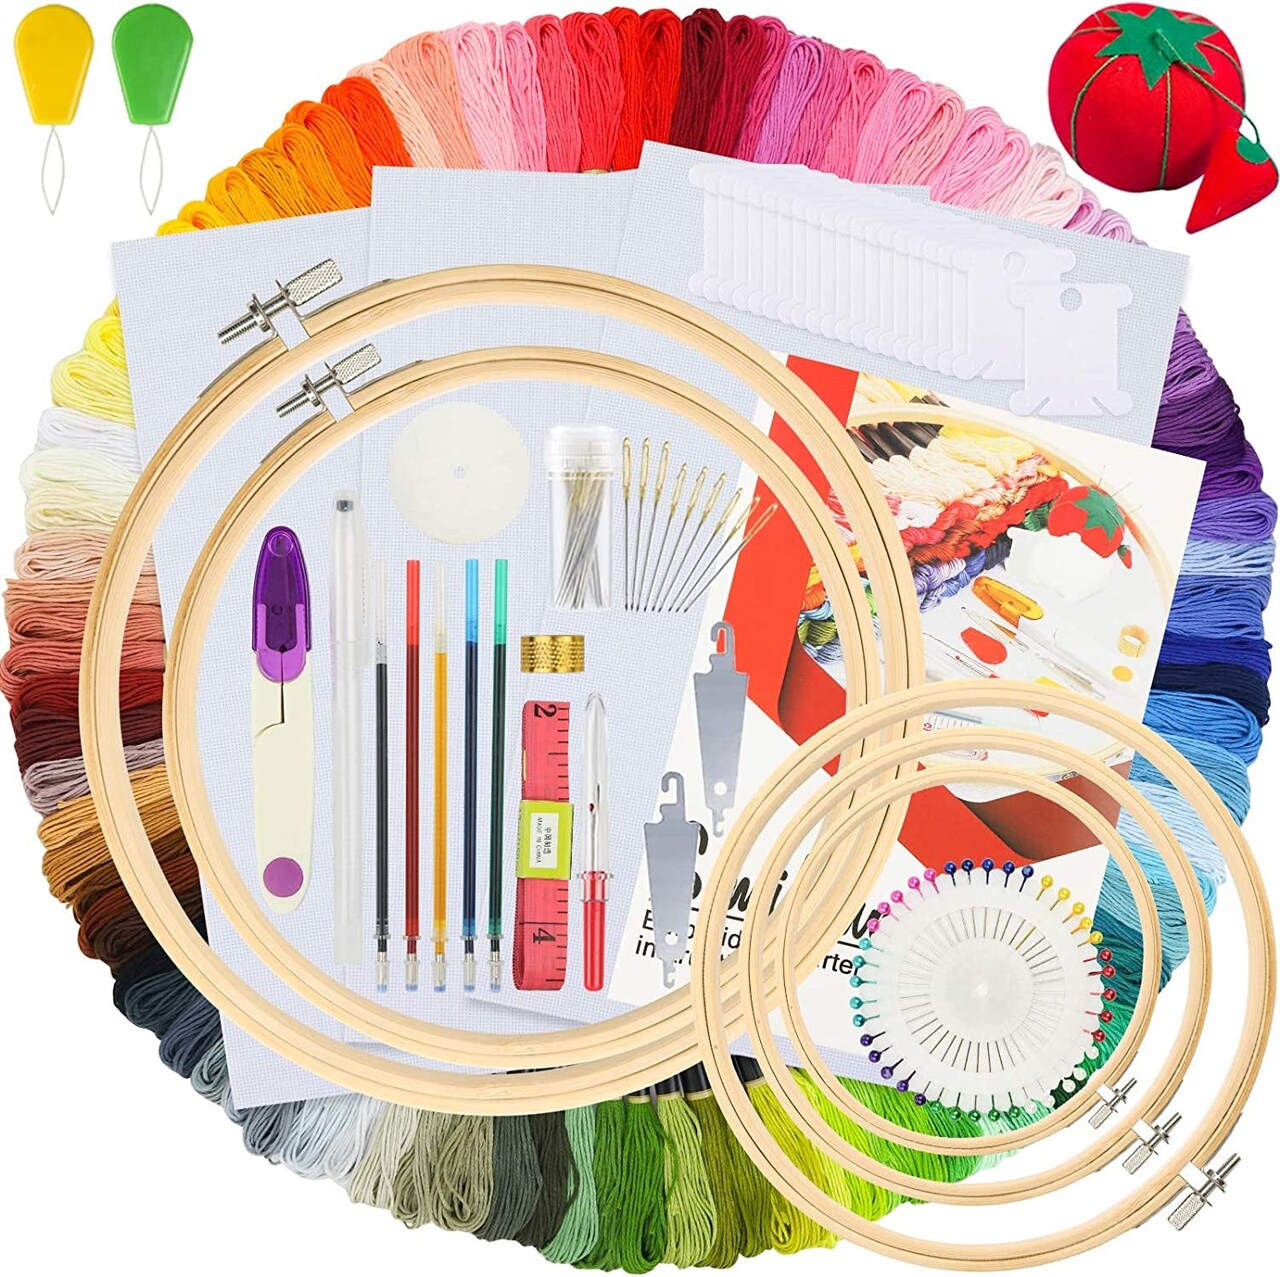 Embroidery Kit 215 Pcs,100 Colors Threads,5 Pcs Embroidery Hoops,3 Pcs Aida  Cloth,40 Sewing Pins,Cross Stitch Tools and Embroidery Starter Kit for  Adults and Kids Beginners